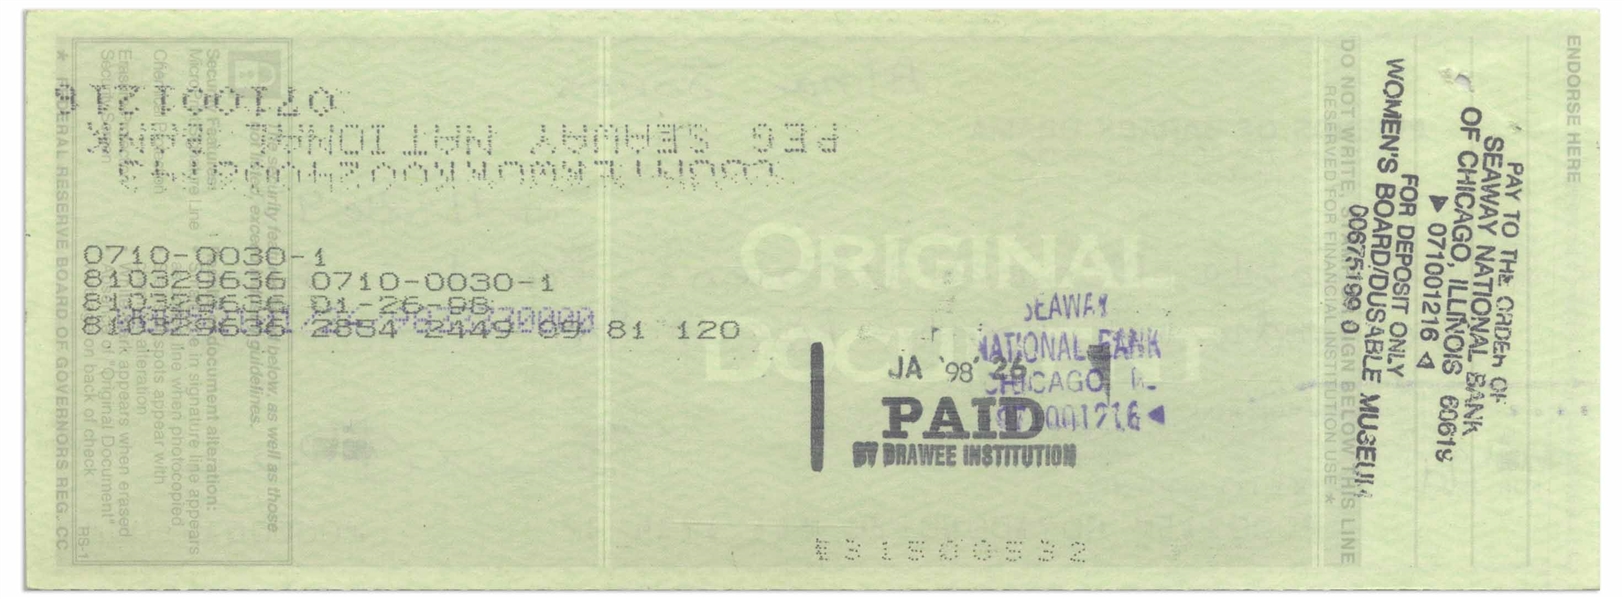 Scarce Check Signed by Barack Obama From the ''Friends of Barack Obama'' Bank Account